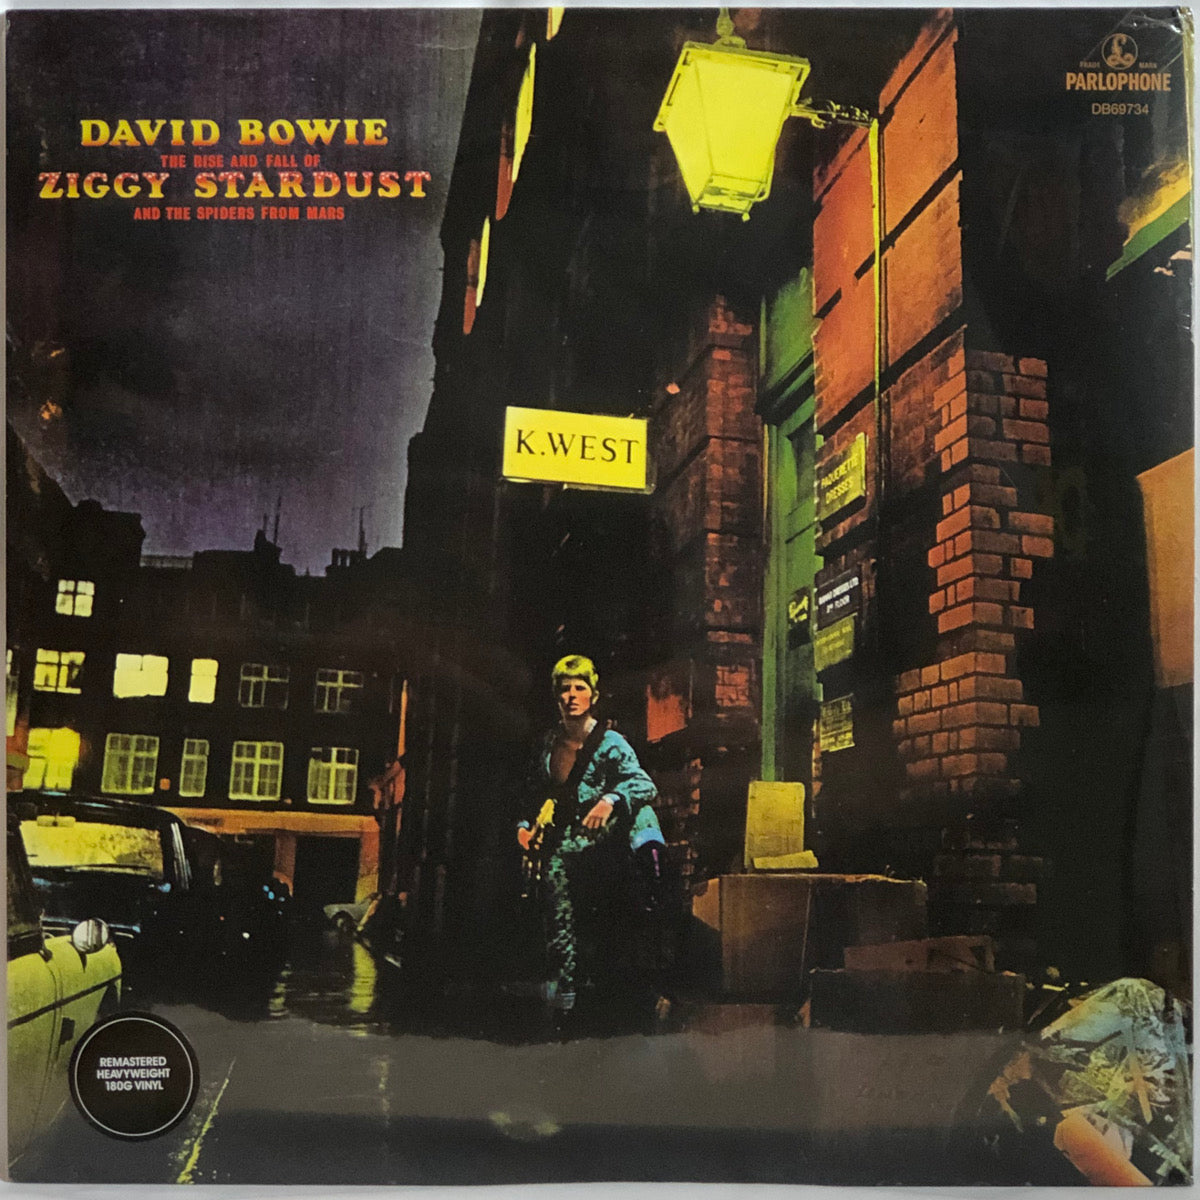 David Bowie - The Rise and Fall of Ziggy Stardust and the Spiders